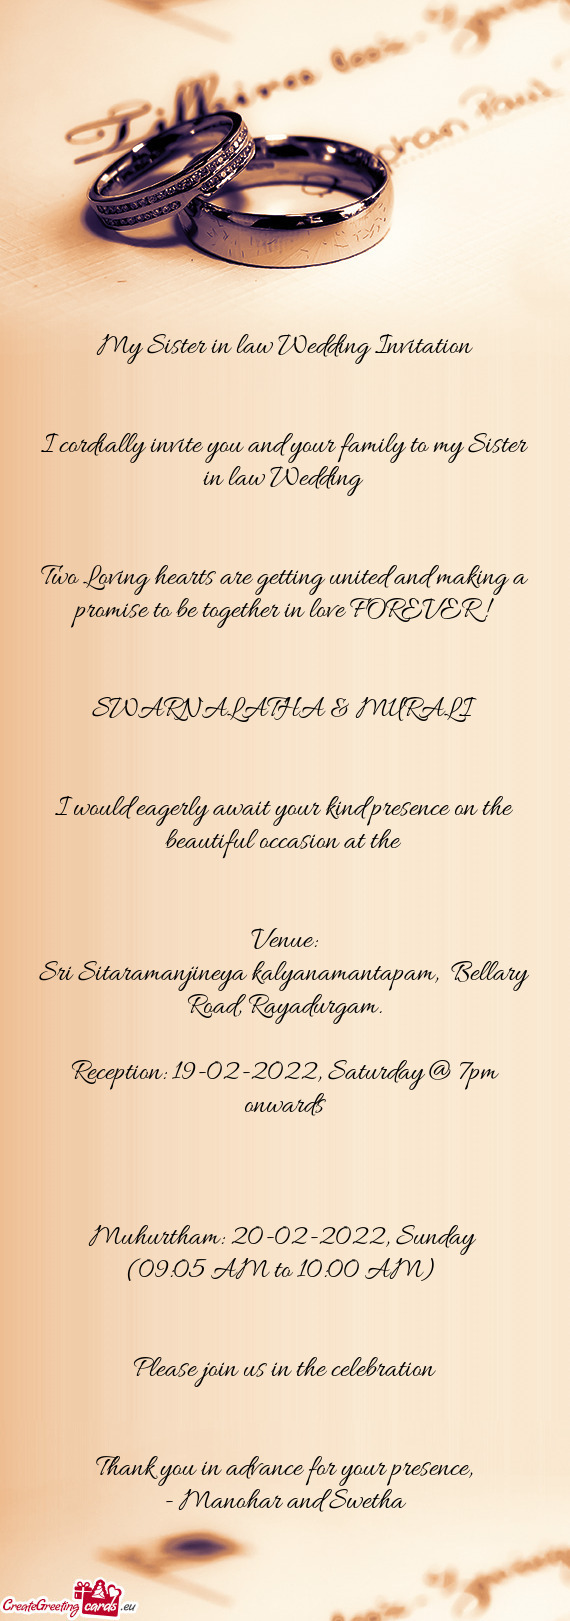 I cordially invite you and your family to my Sister in law Wedding